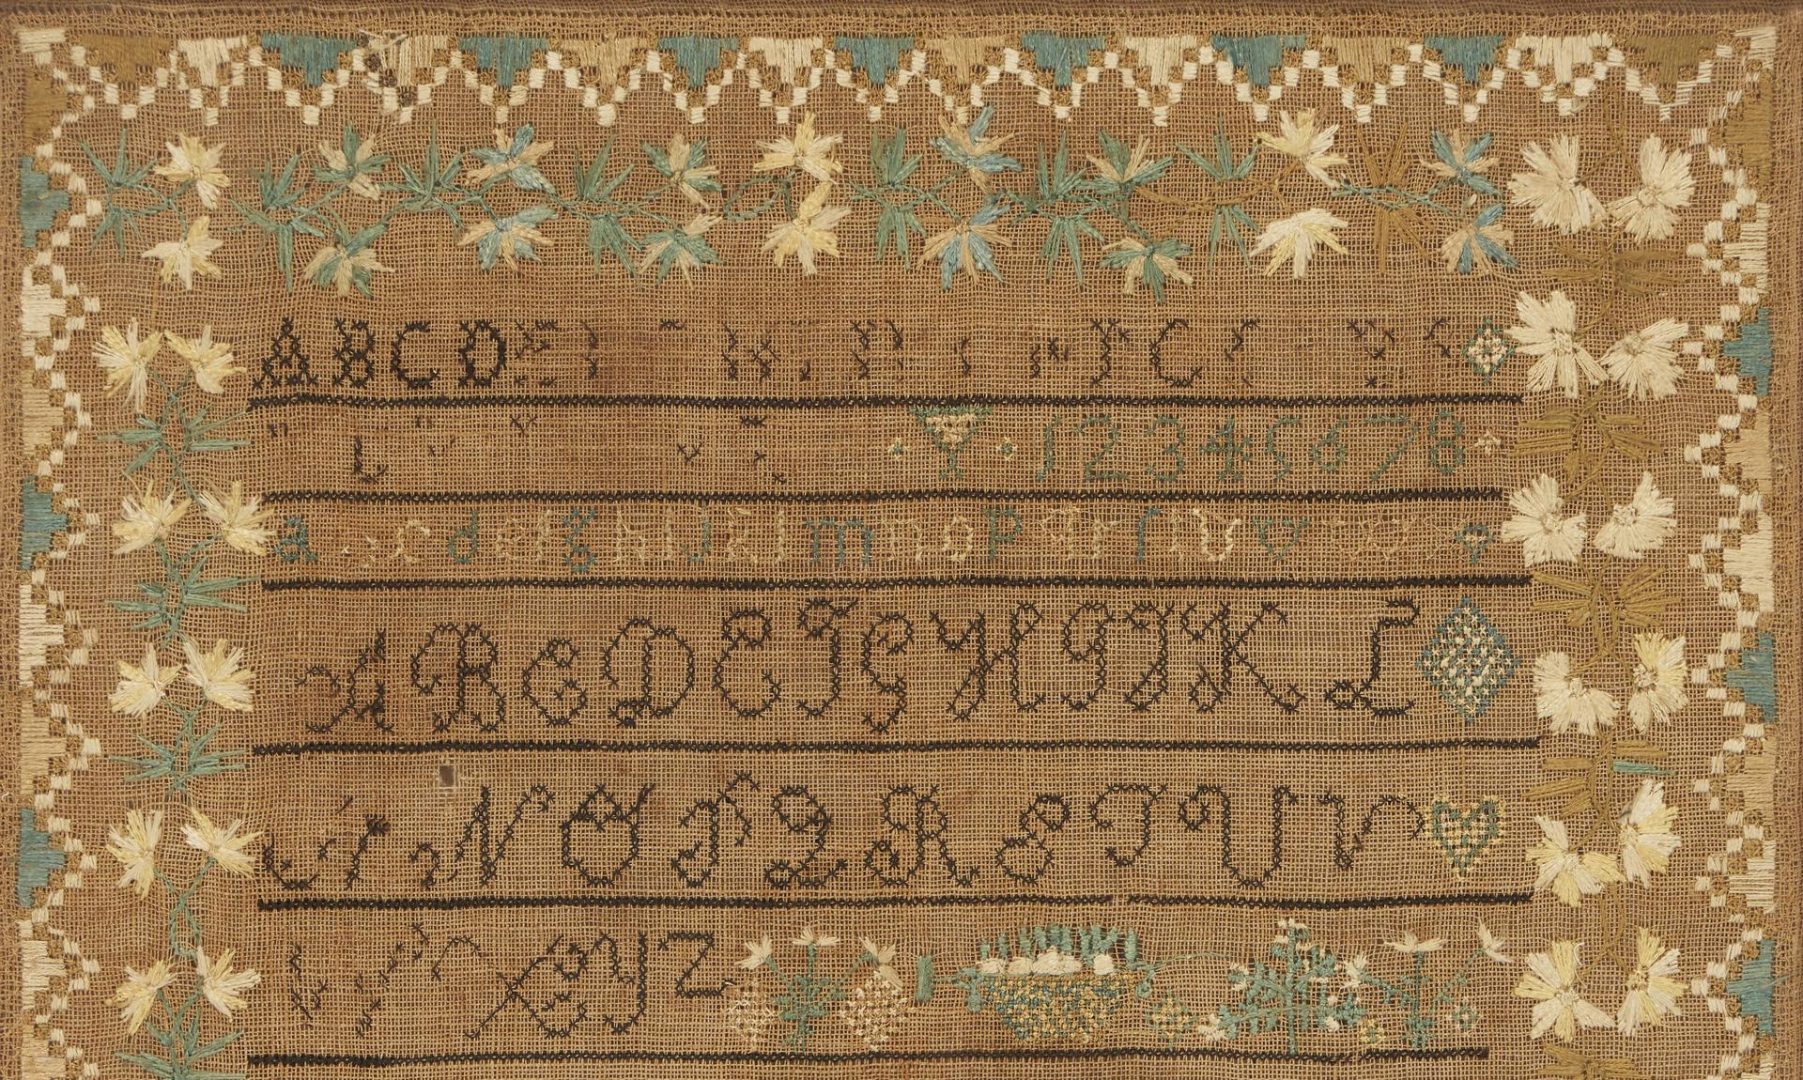 Lot 505: Massachusetts Sampler by Emily Sparhawk (Perry), Early 19th C.